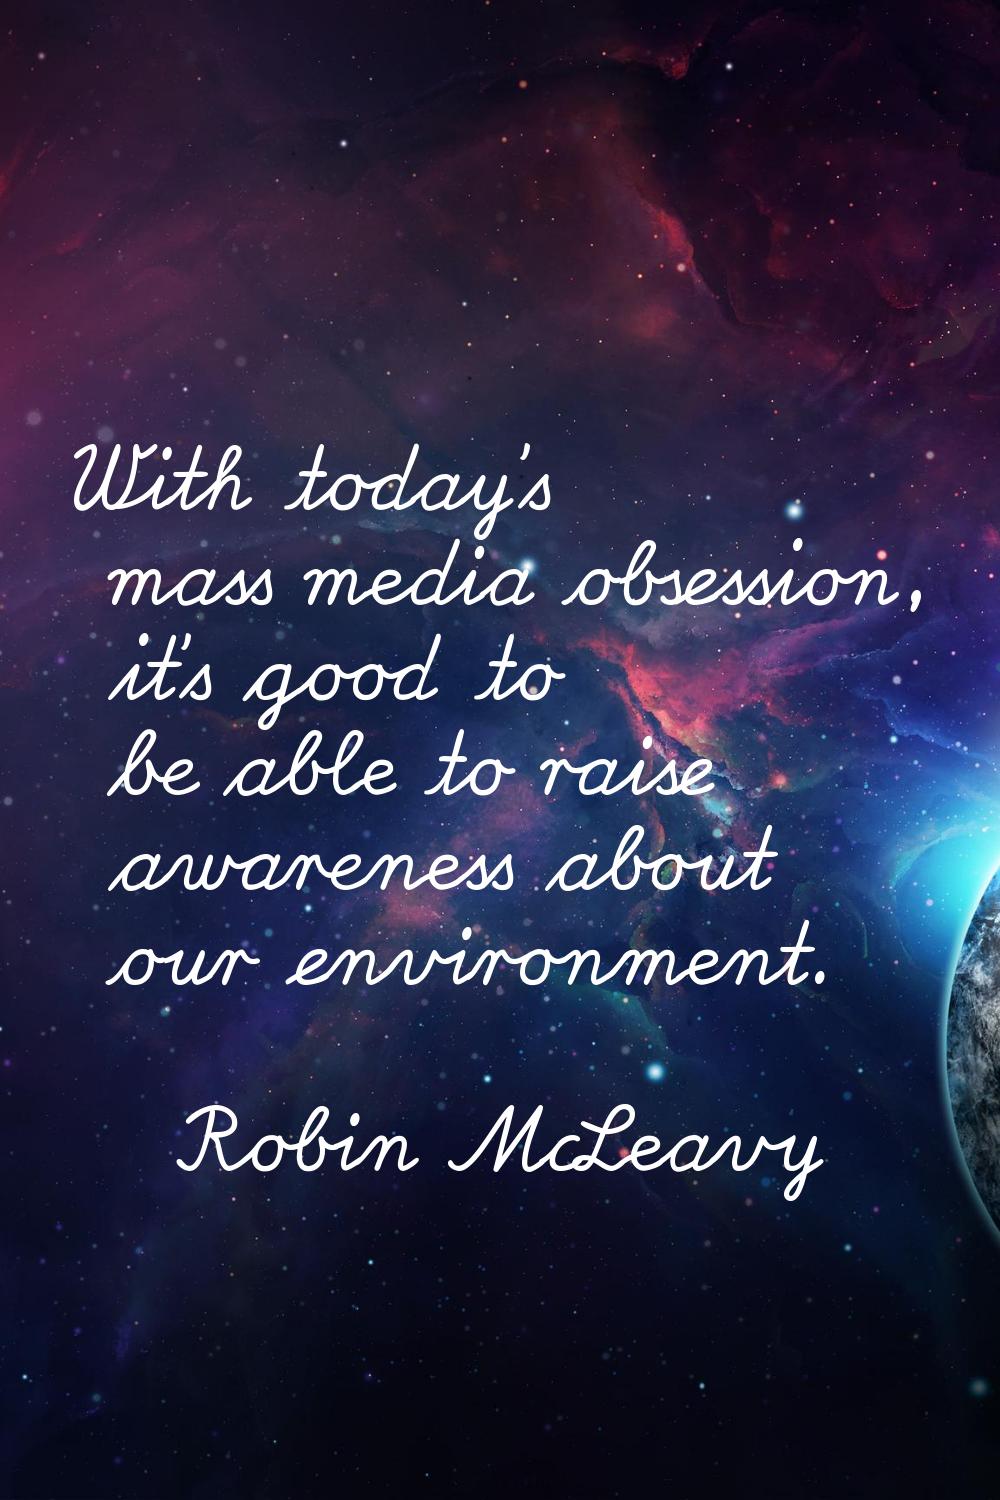 With today's mass media obsession, it's good to be able to raise awareness about our environment.